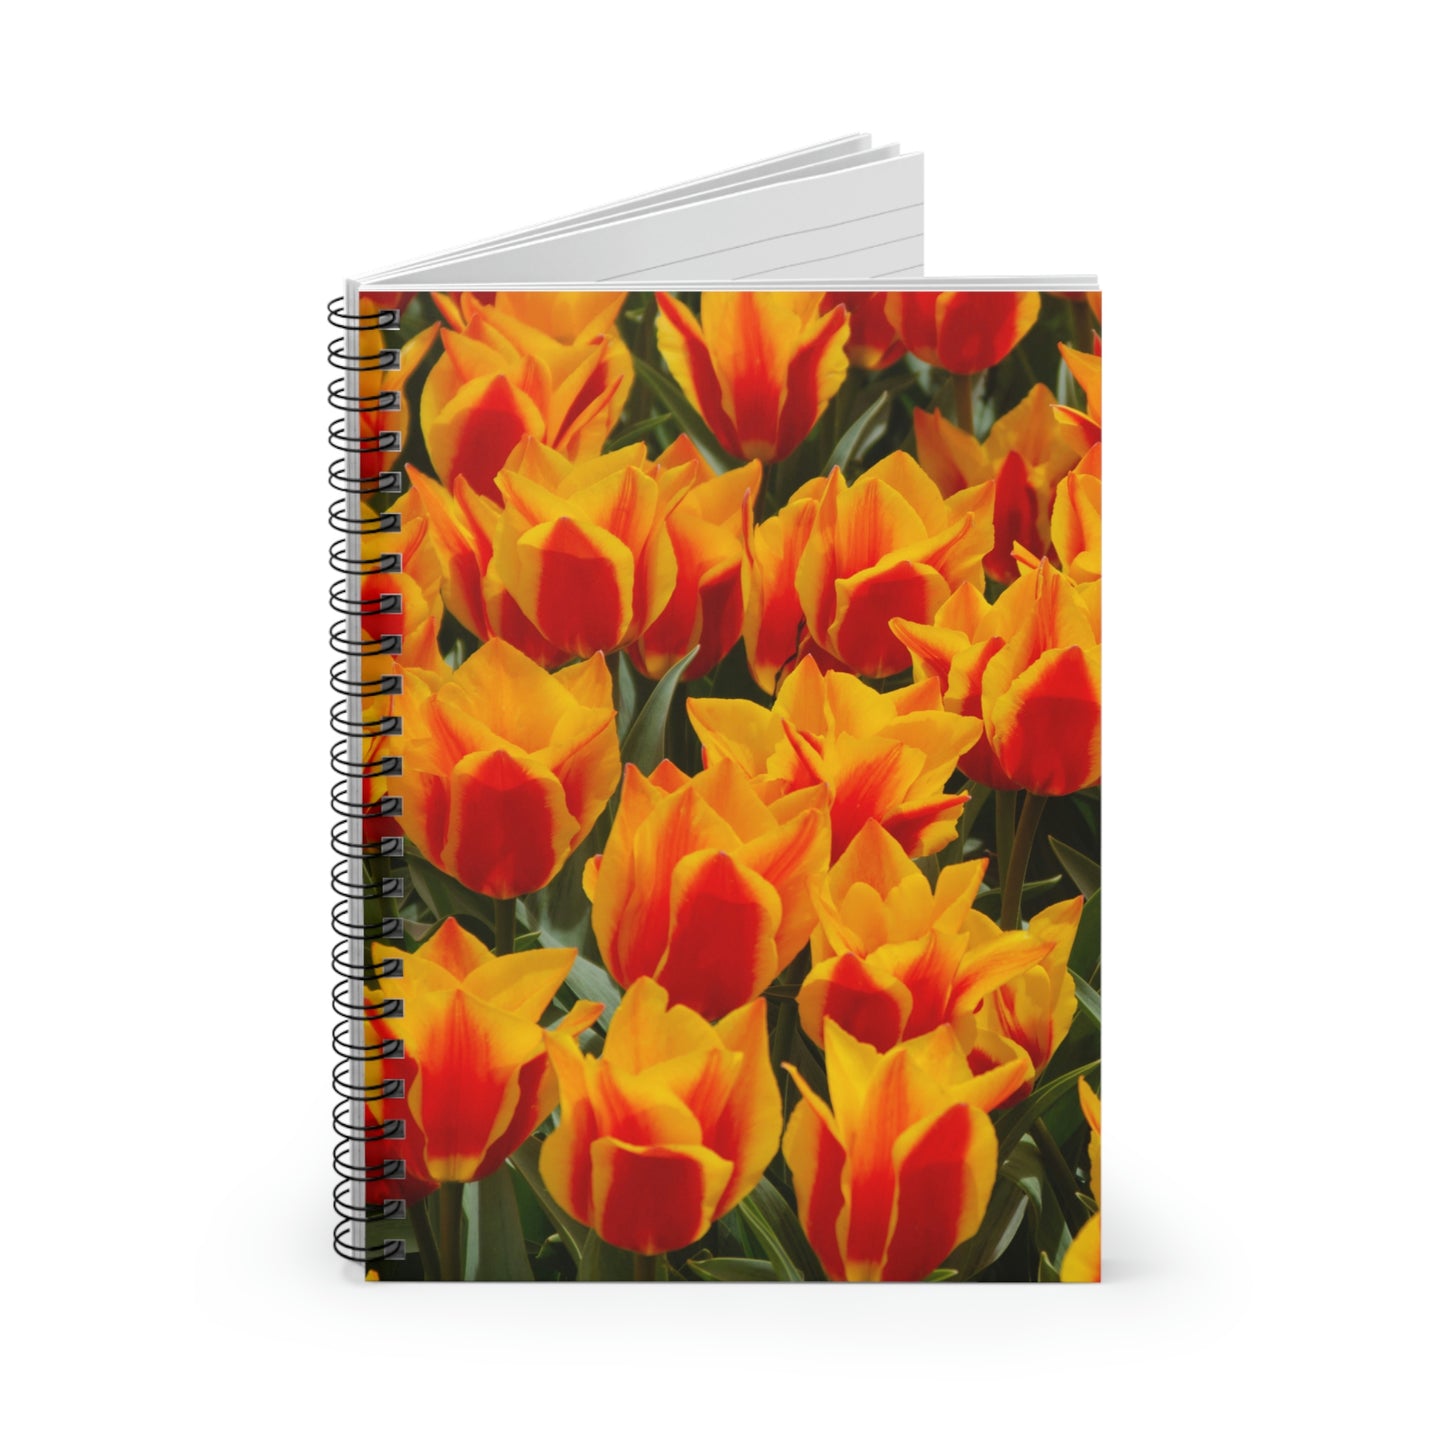 Flowers 18 Spiral Notebook - Ruled Line